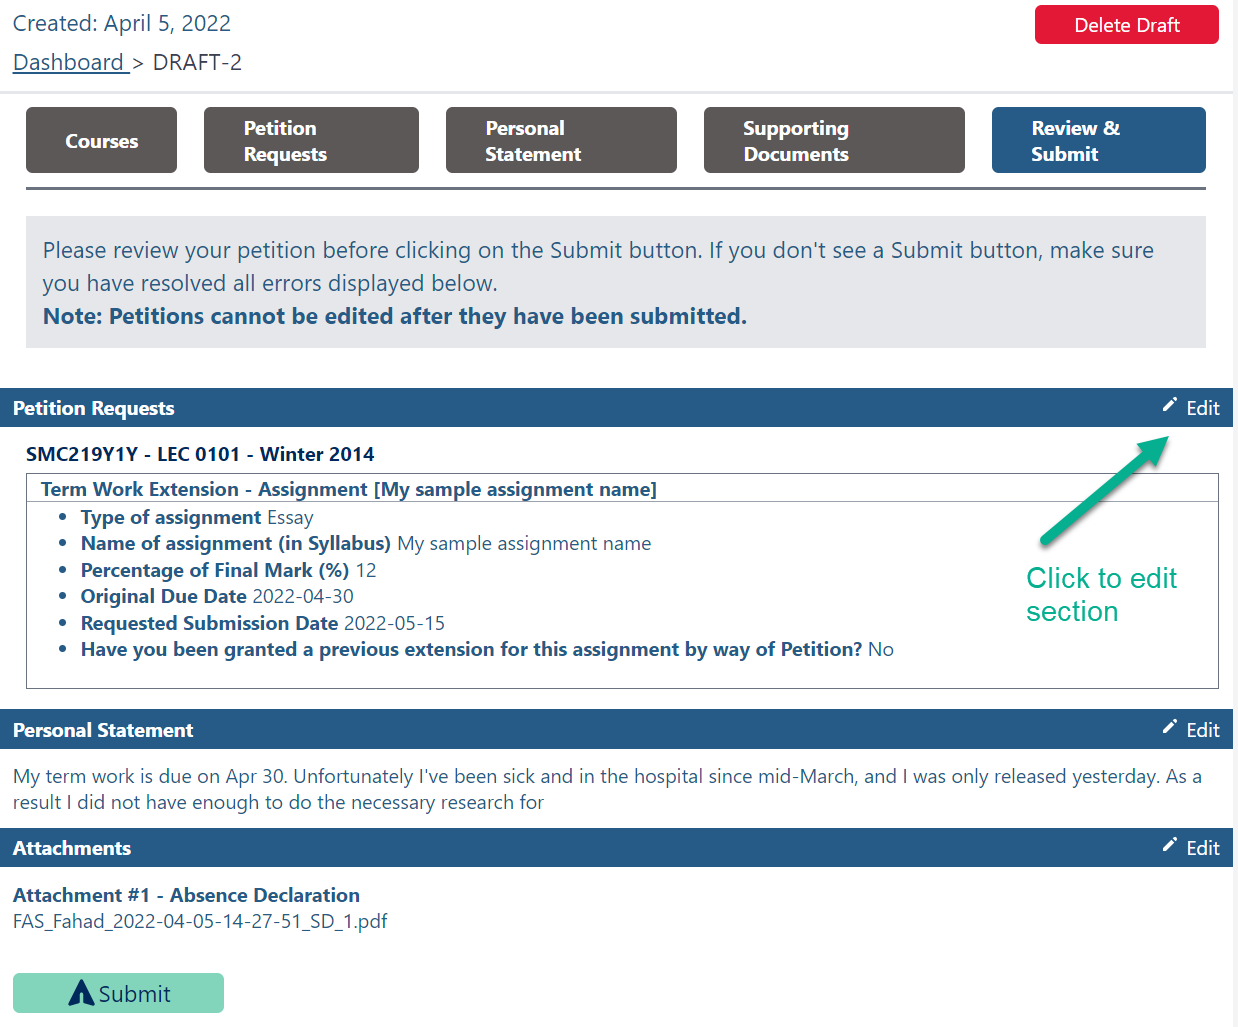 Screenshot showing how to edit a petition before submitting